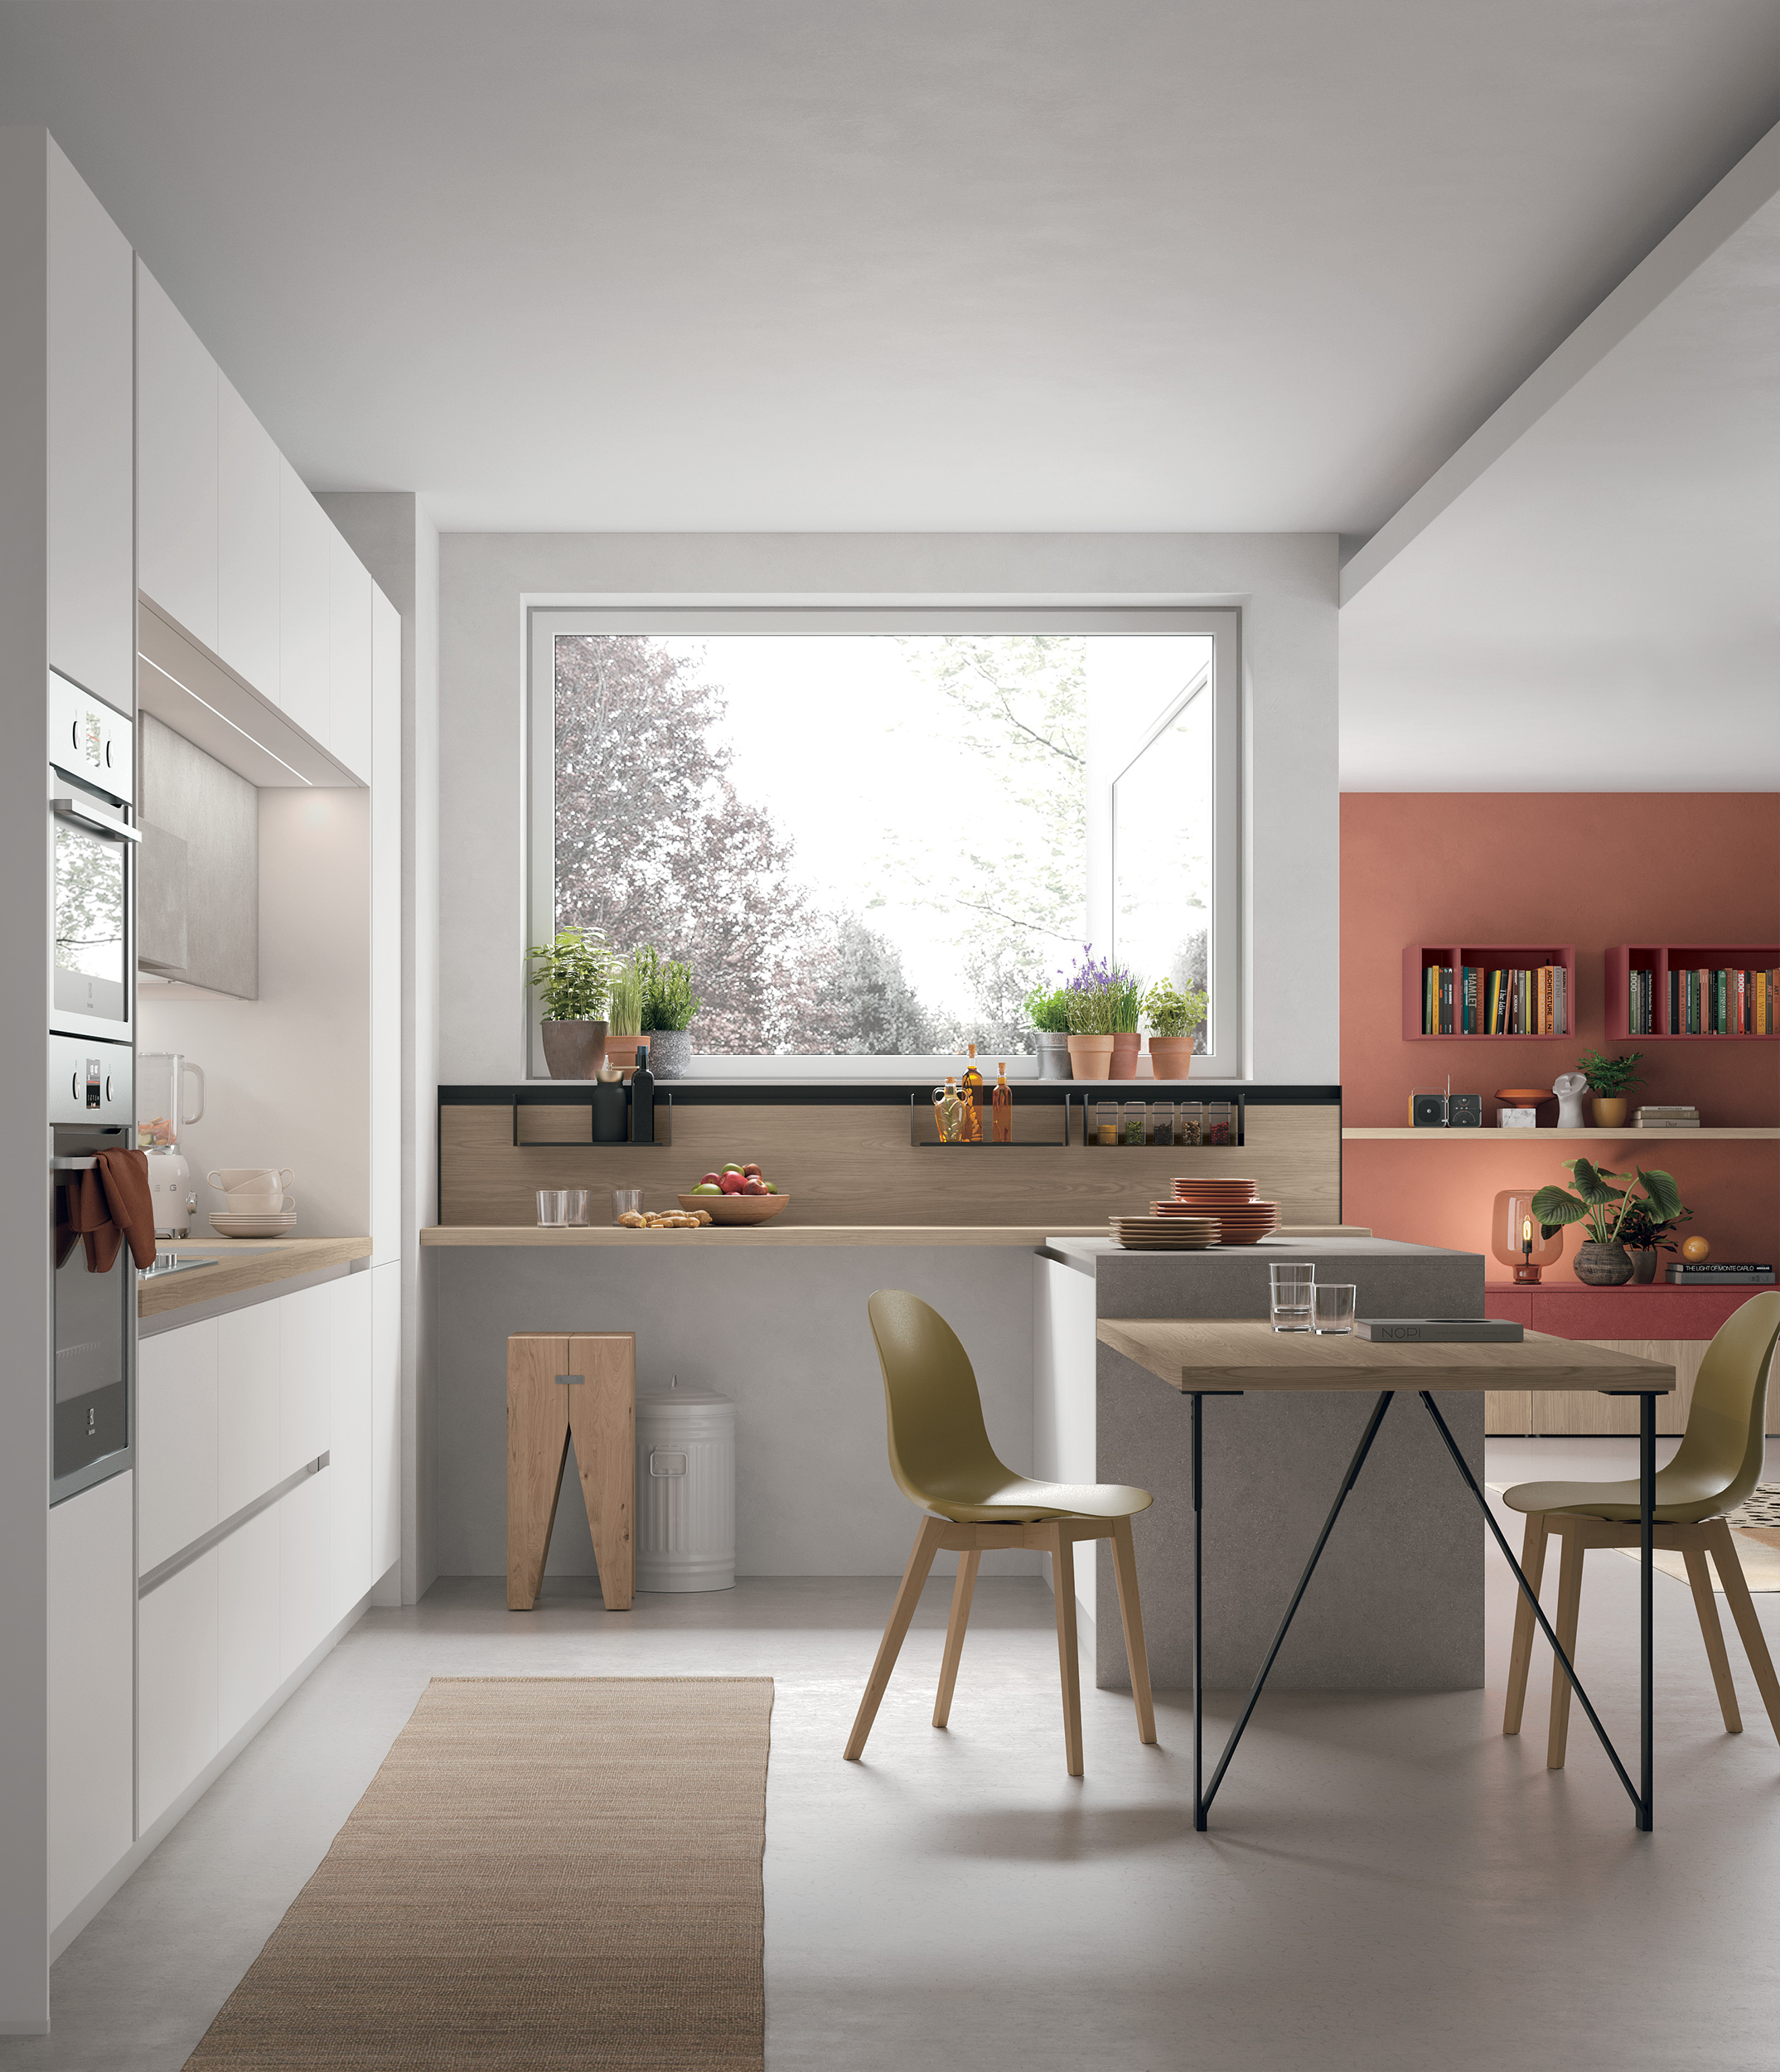 Stosa launches Karma, Clean-cut design and essential shapes